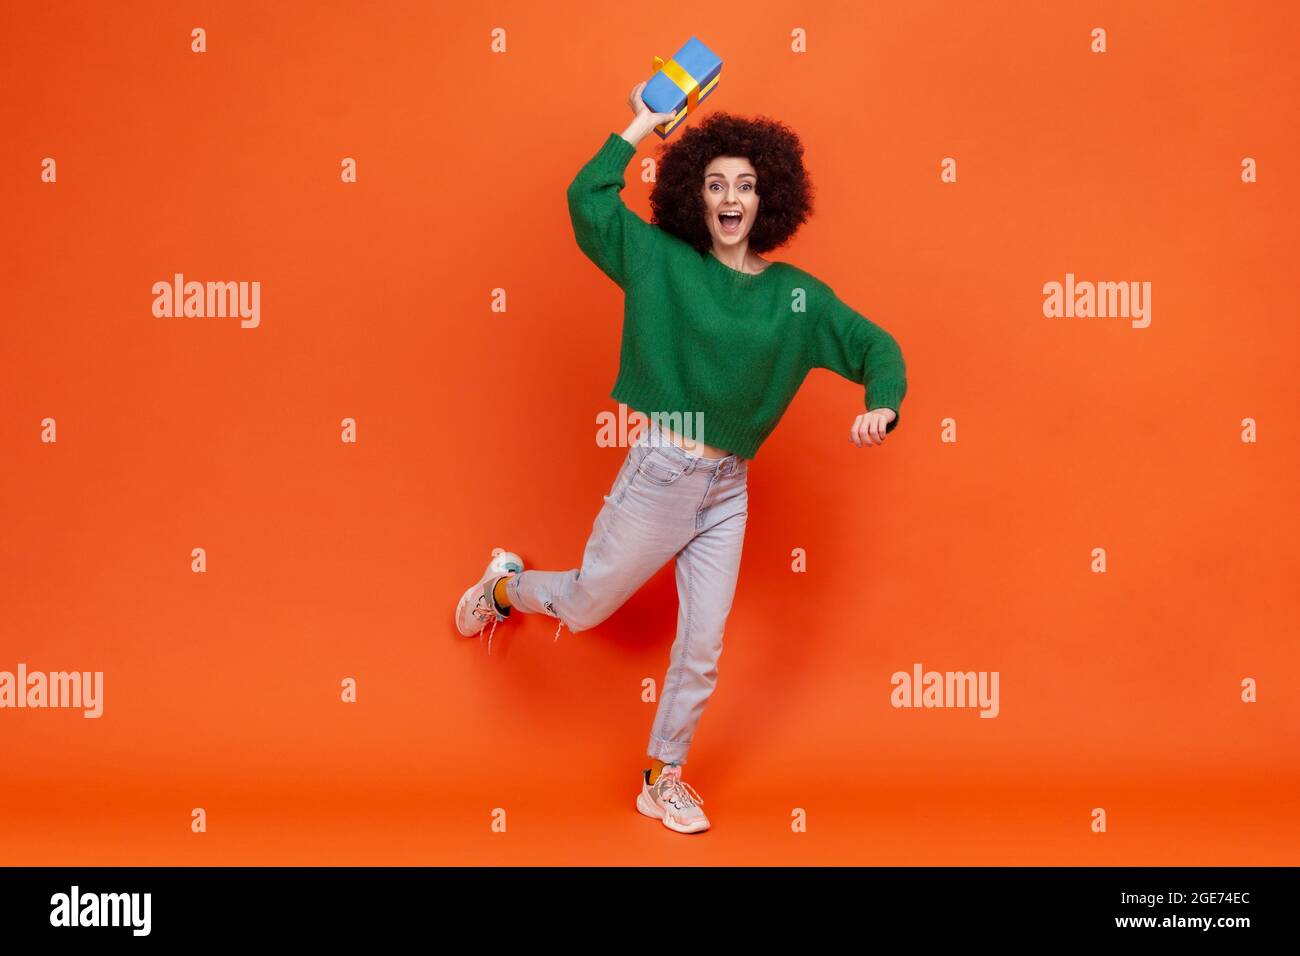 Full length portrait of happy woman with curly hair wearing green casual style sweater throwing blue wrapped present box, has excited expression. Indo Stock Photo